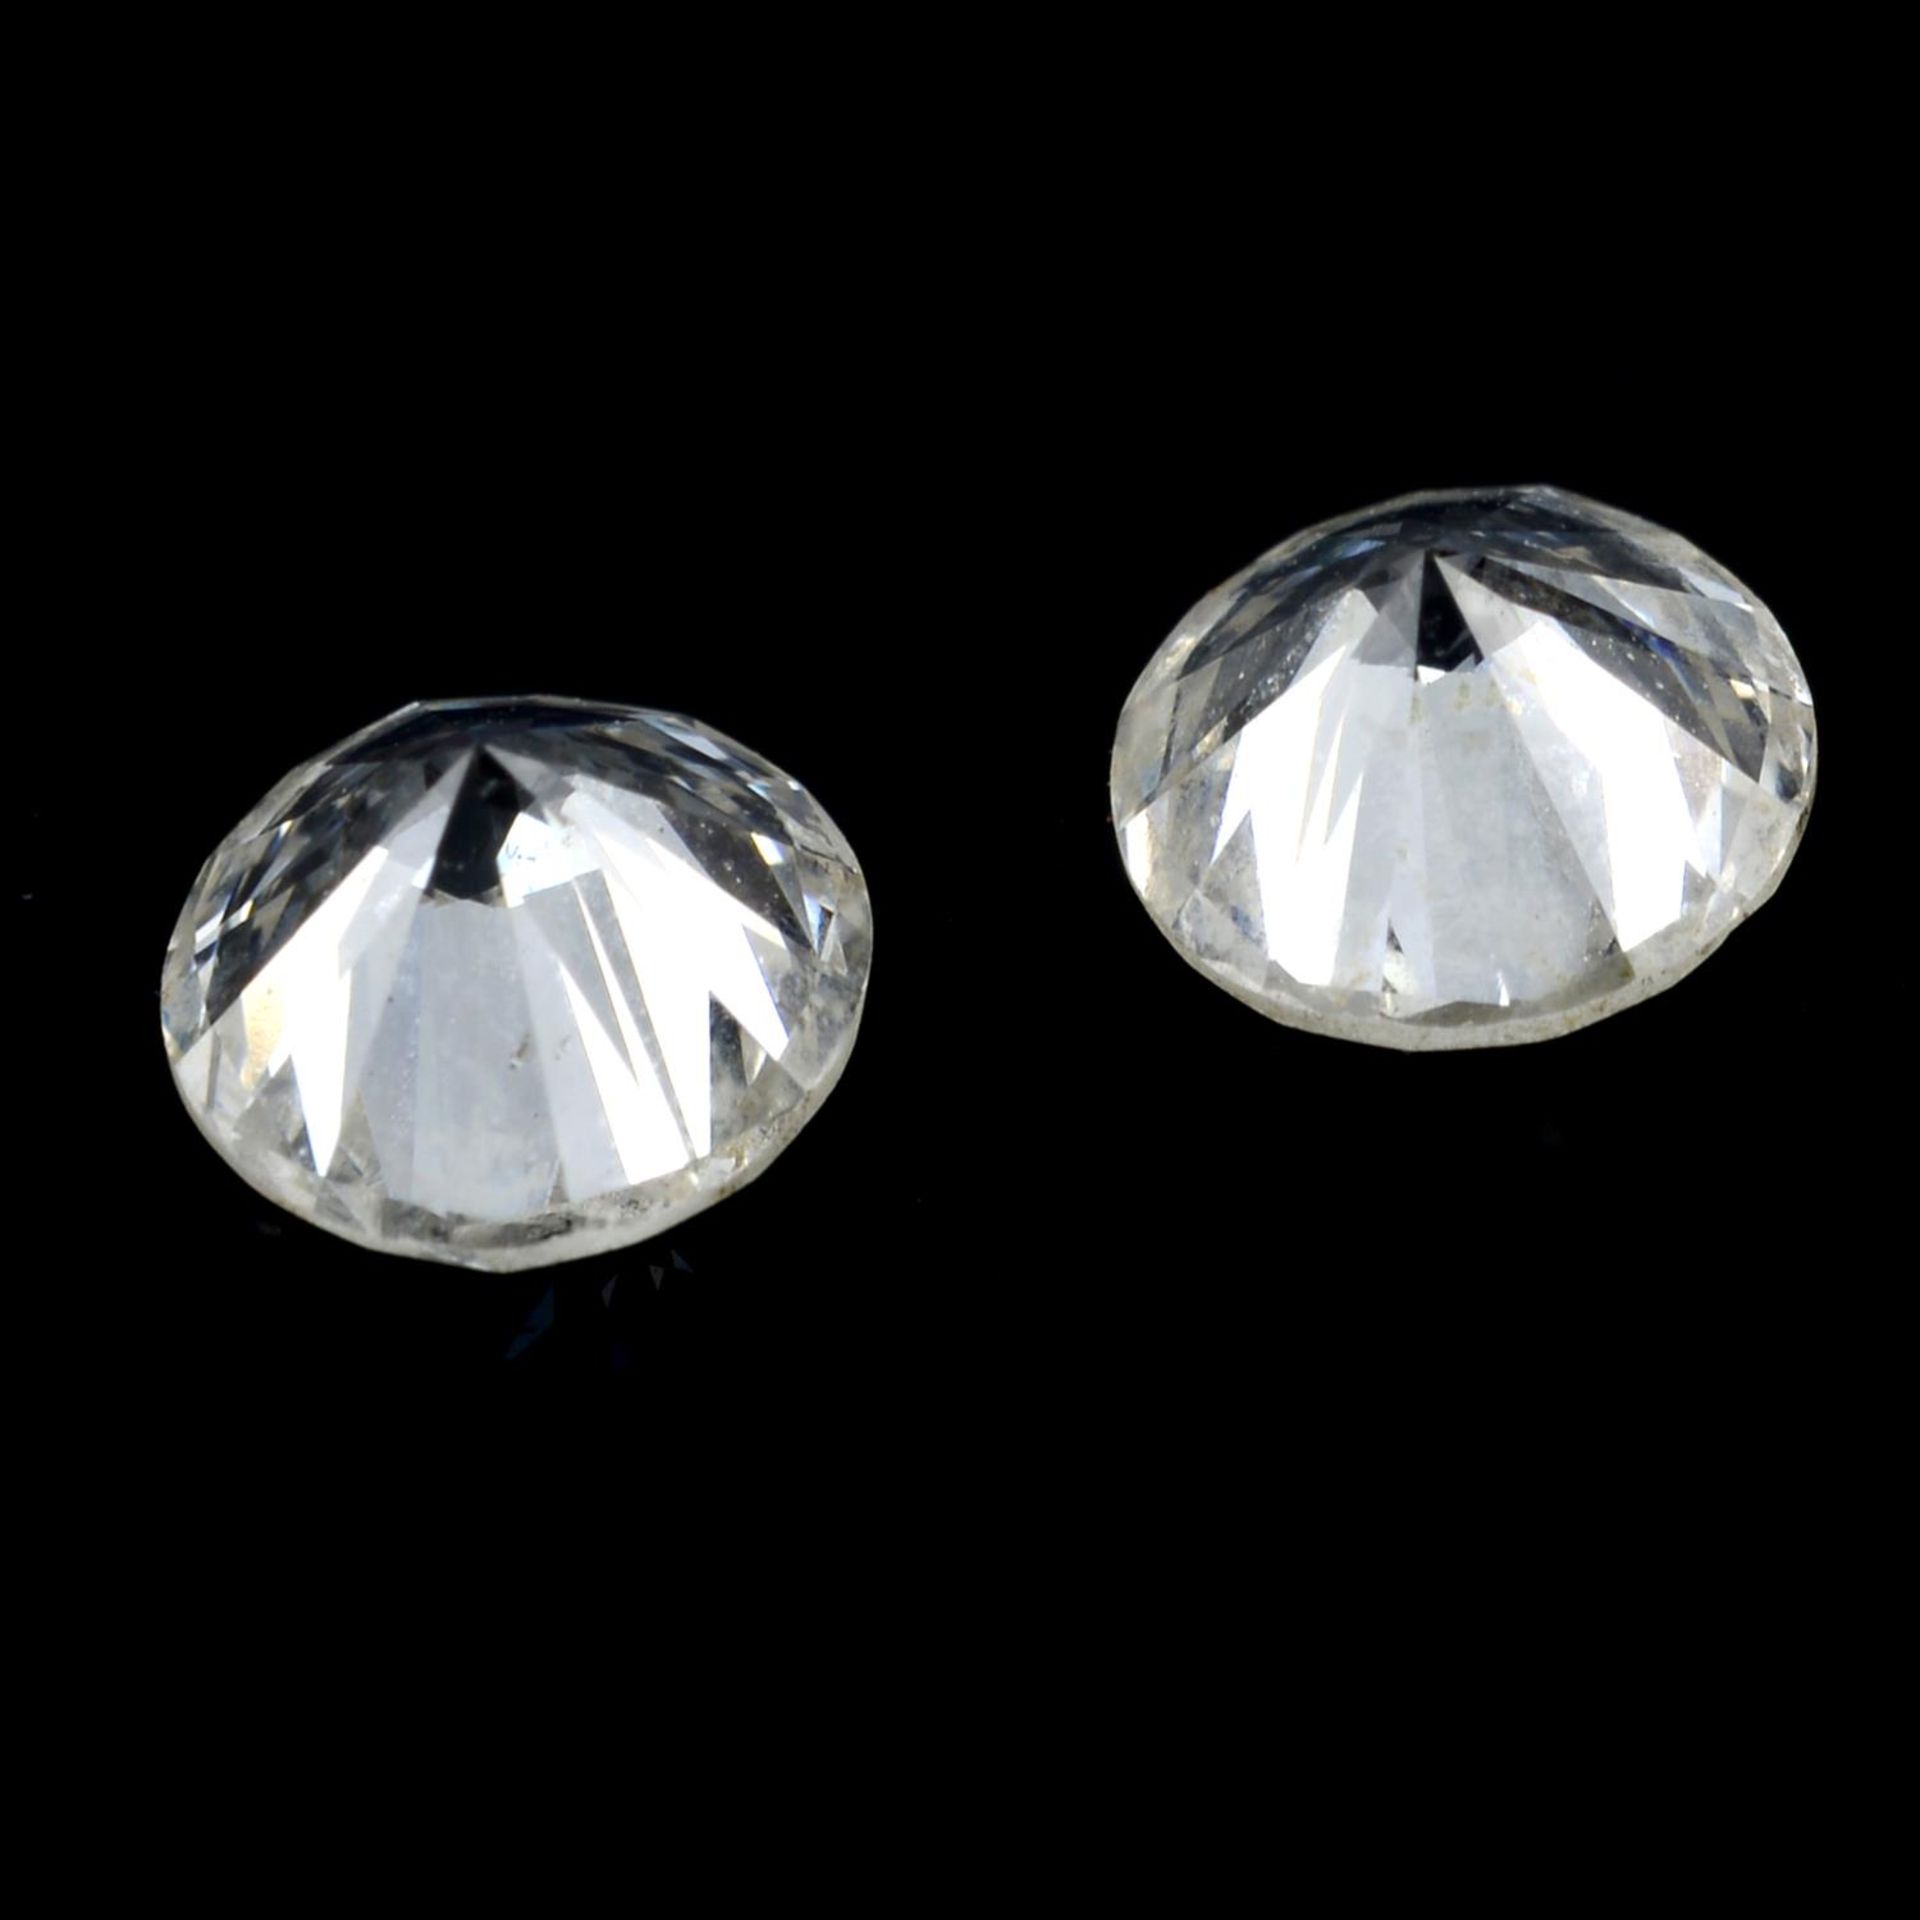 Pair of brilliant cut diamonds weighing 0.66ct. Diamonds estimated to be H colour and VS2 clarity. - Image 2 of 2